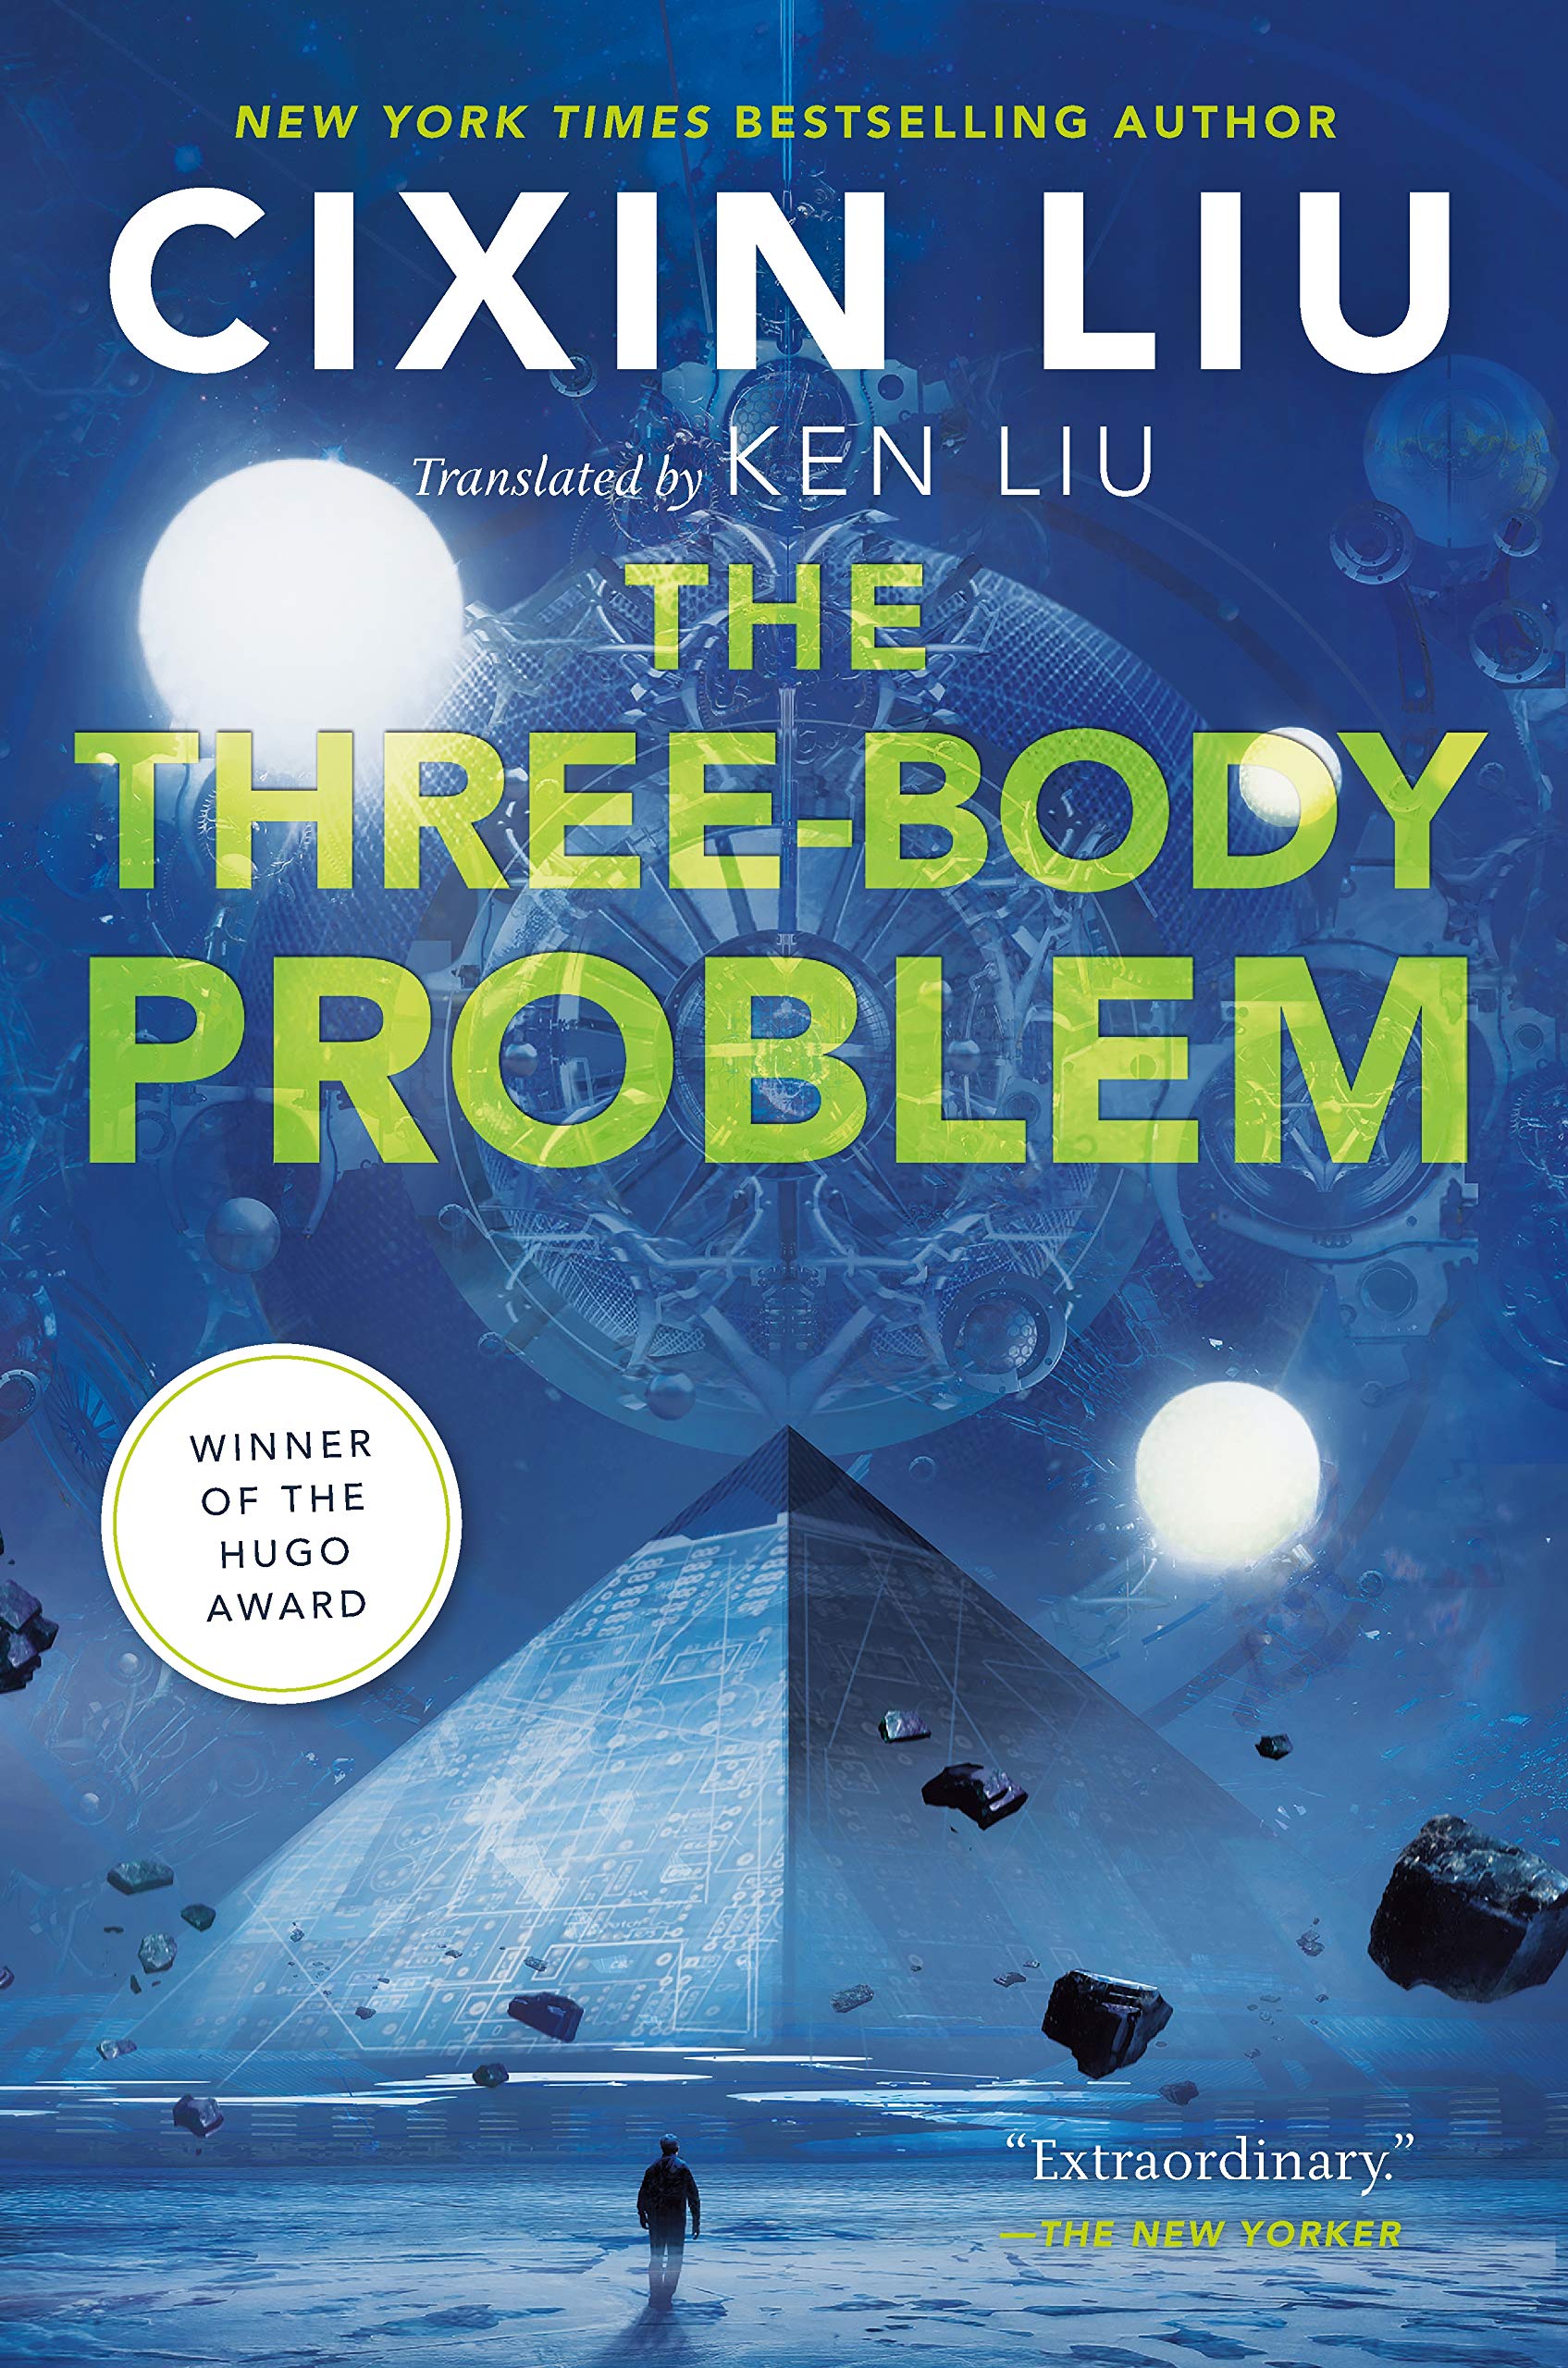 This Is the Only Way to Solve the Three-Body Problem